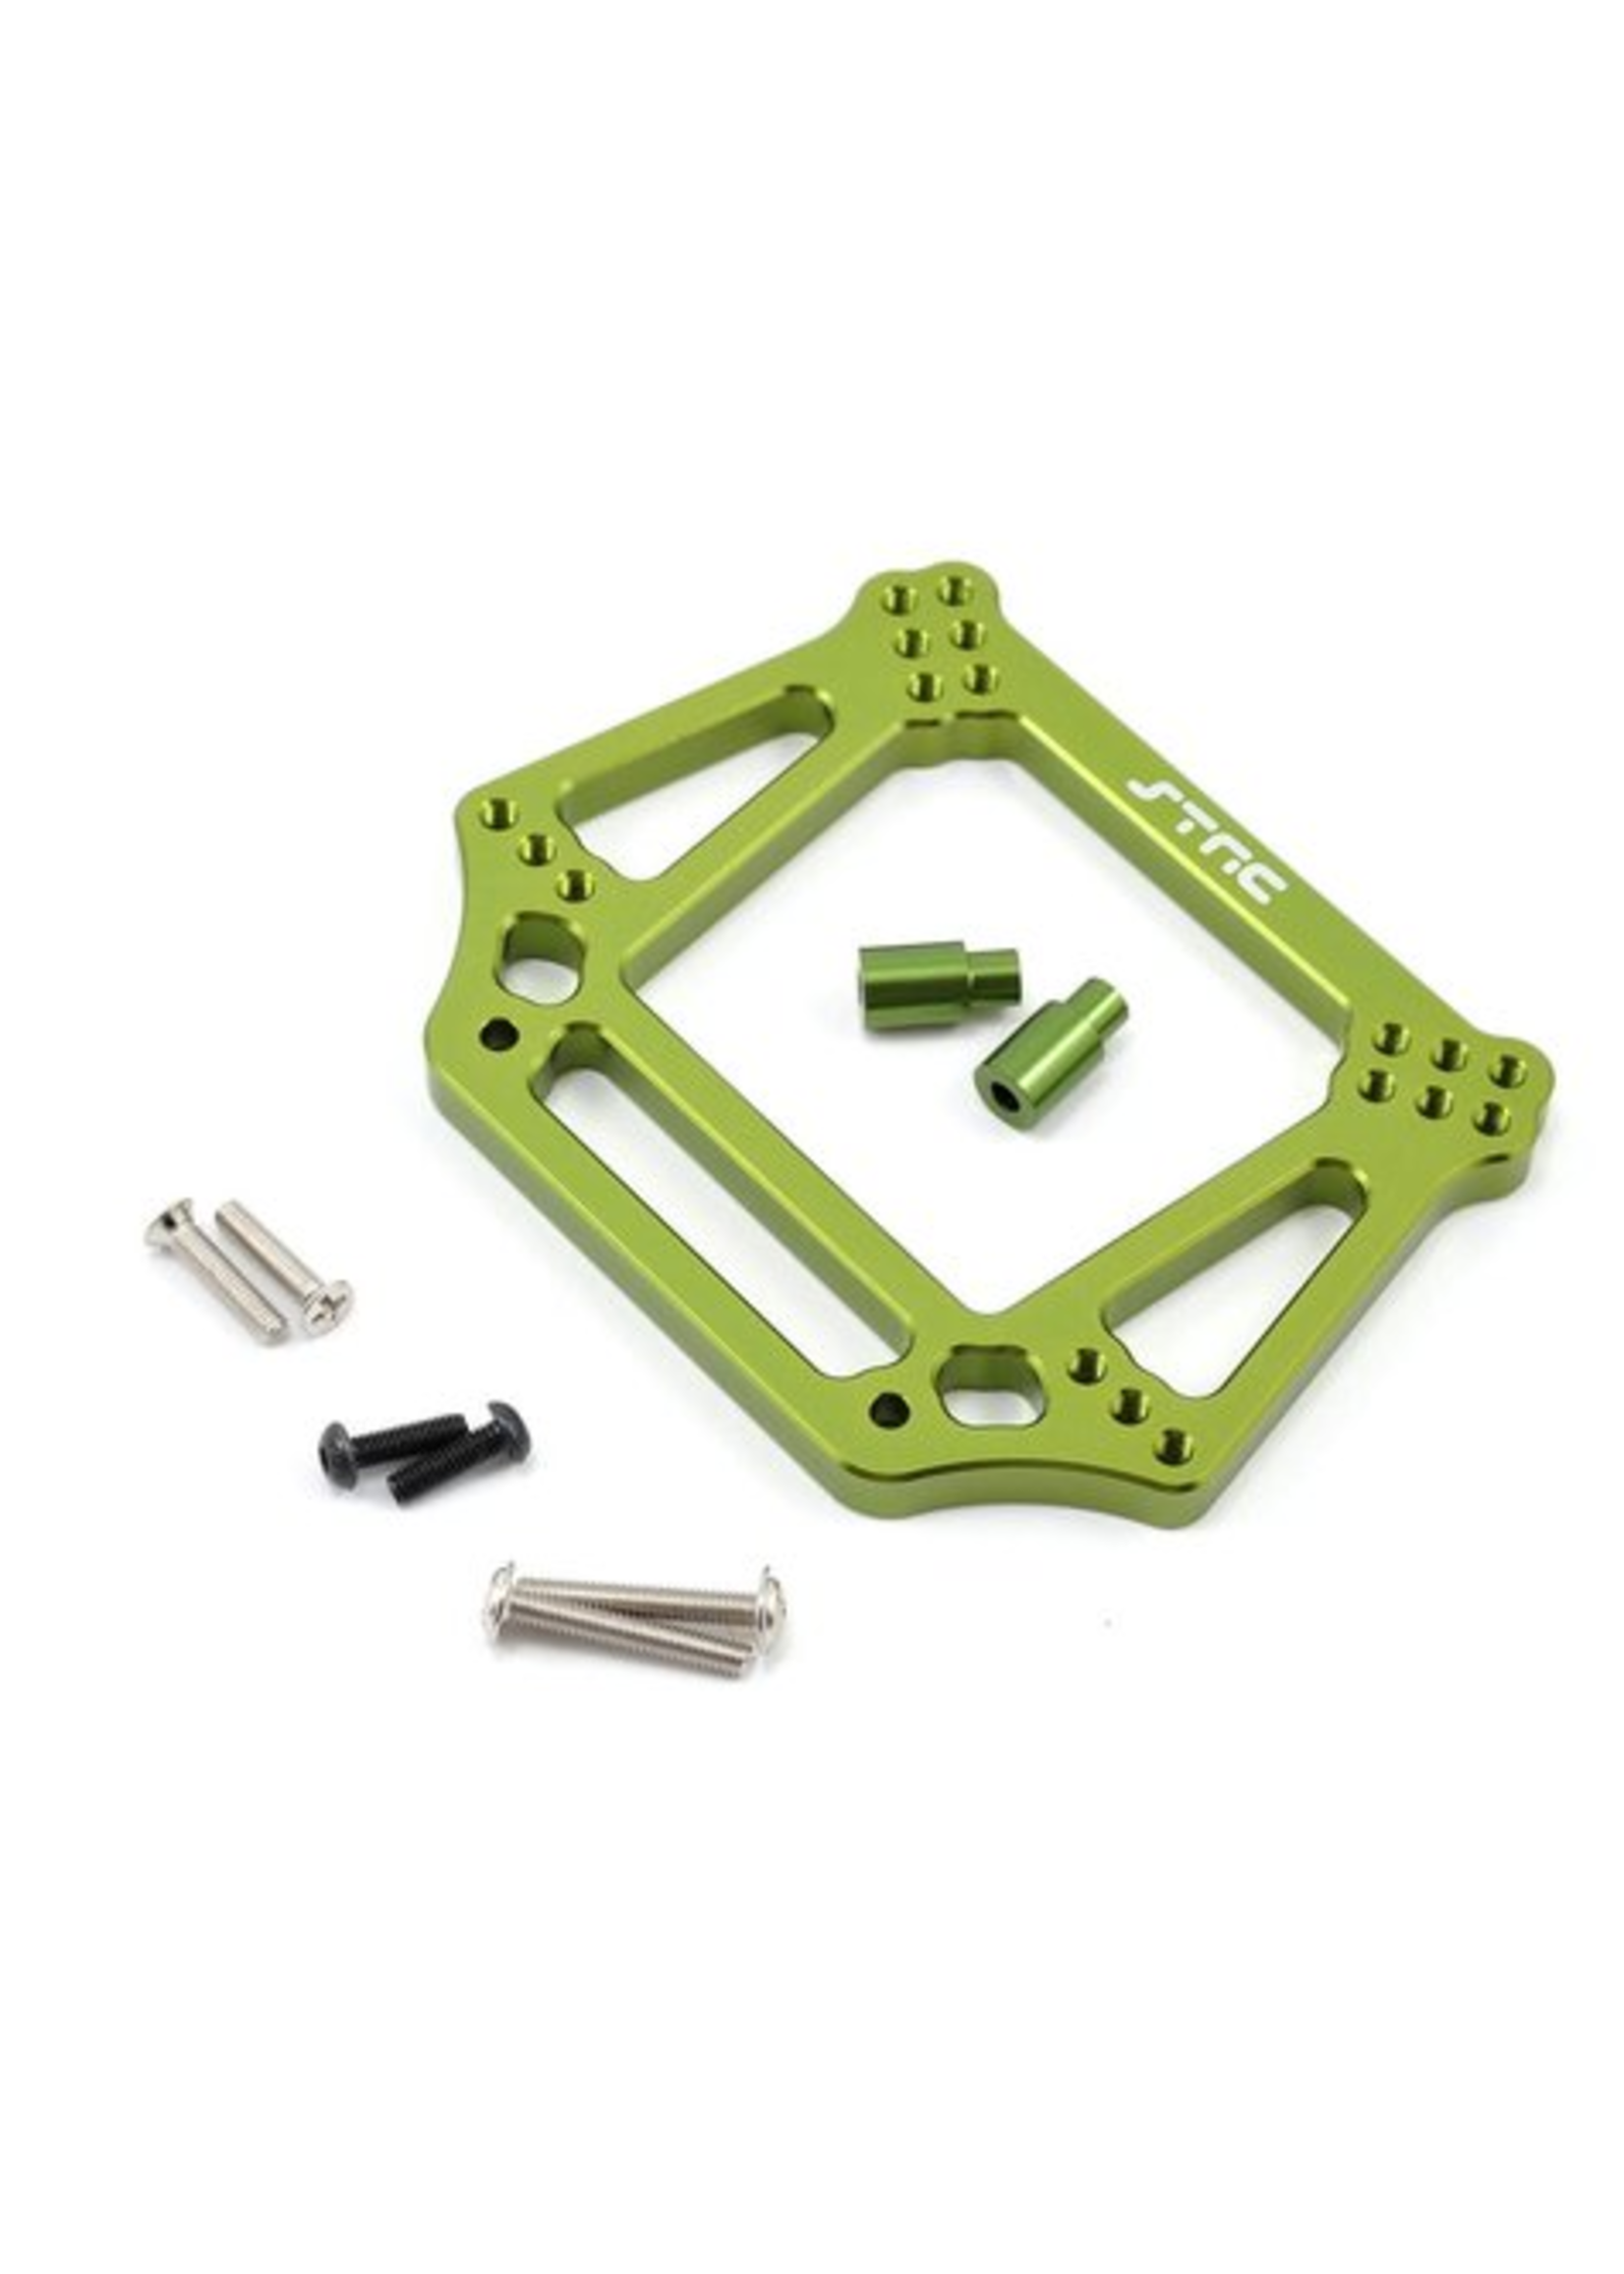 ST Racing Concepts SPTST3639G ST Racing Concepts Aluminum 6mm Heavy Duty Front Shock Tower for Traxxas Stampede/Rustler/Bandit/Slash (Green)